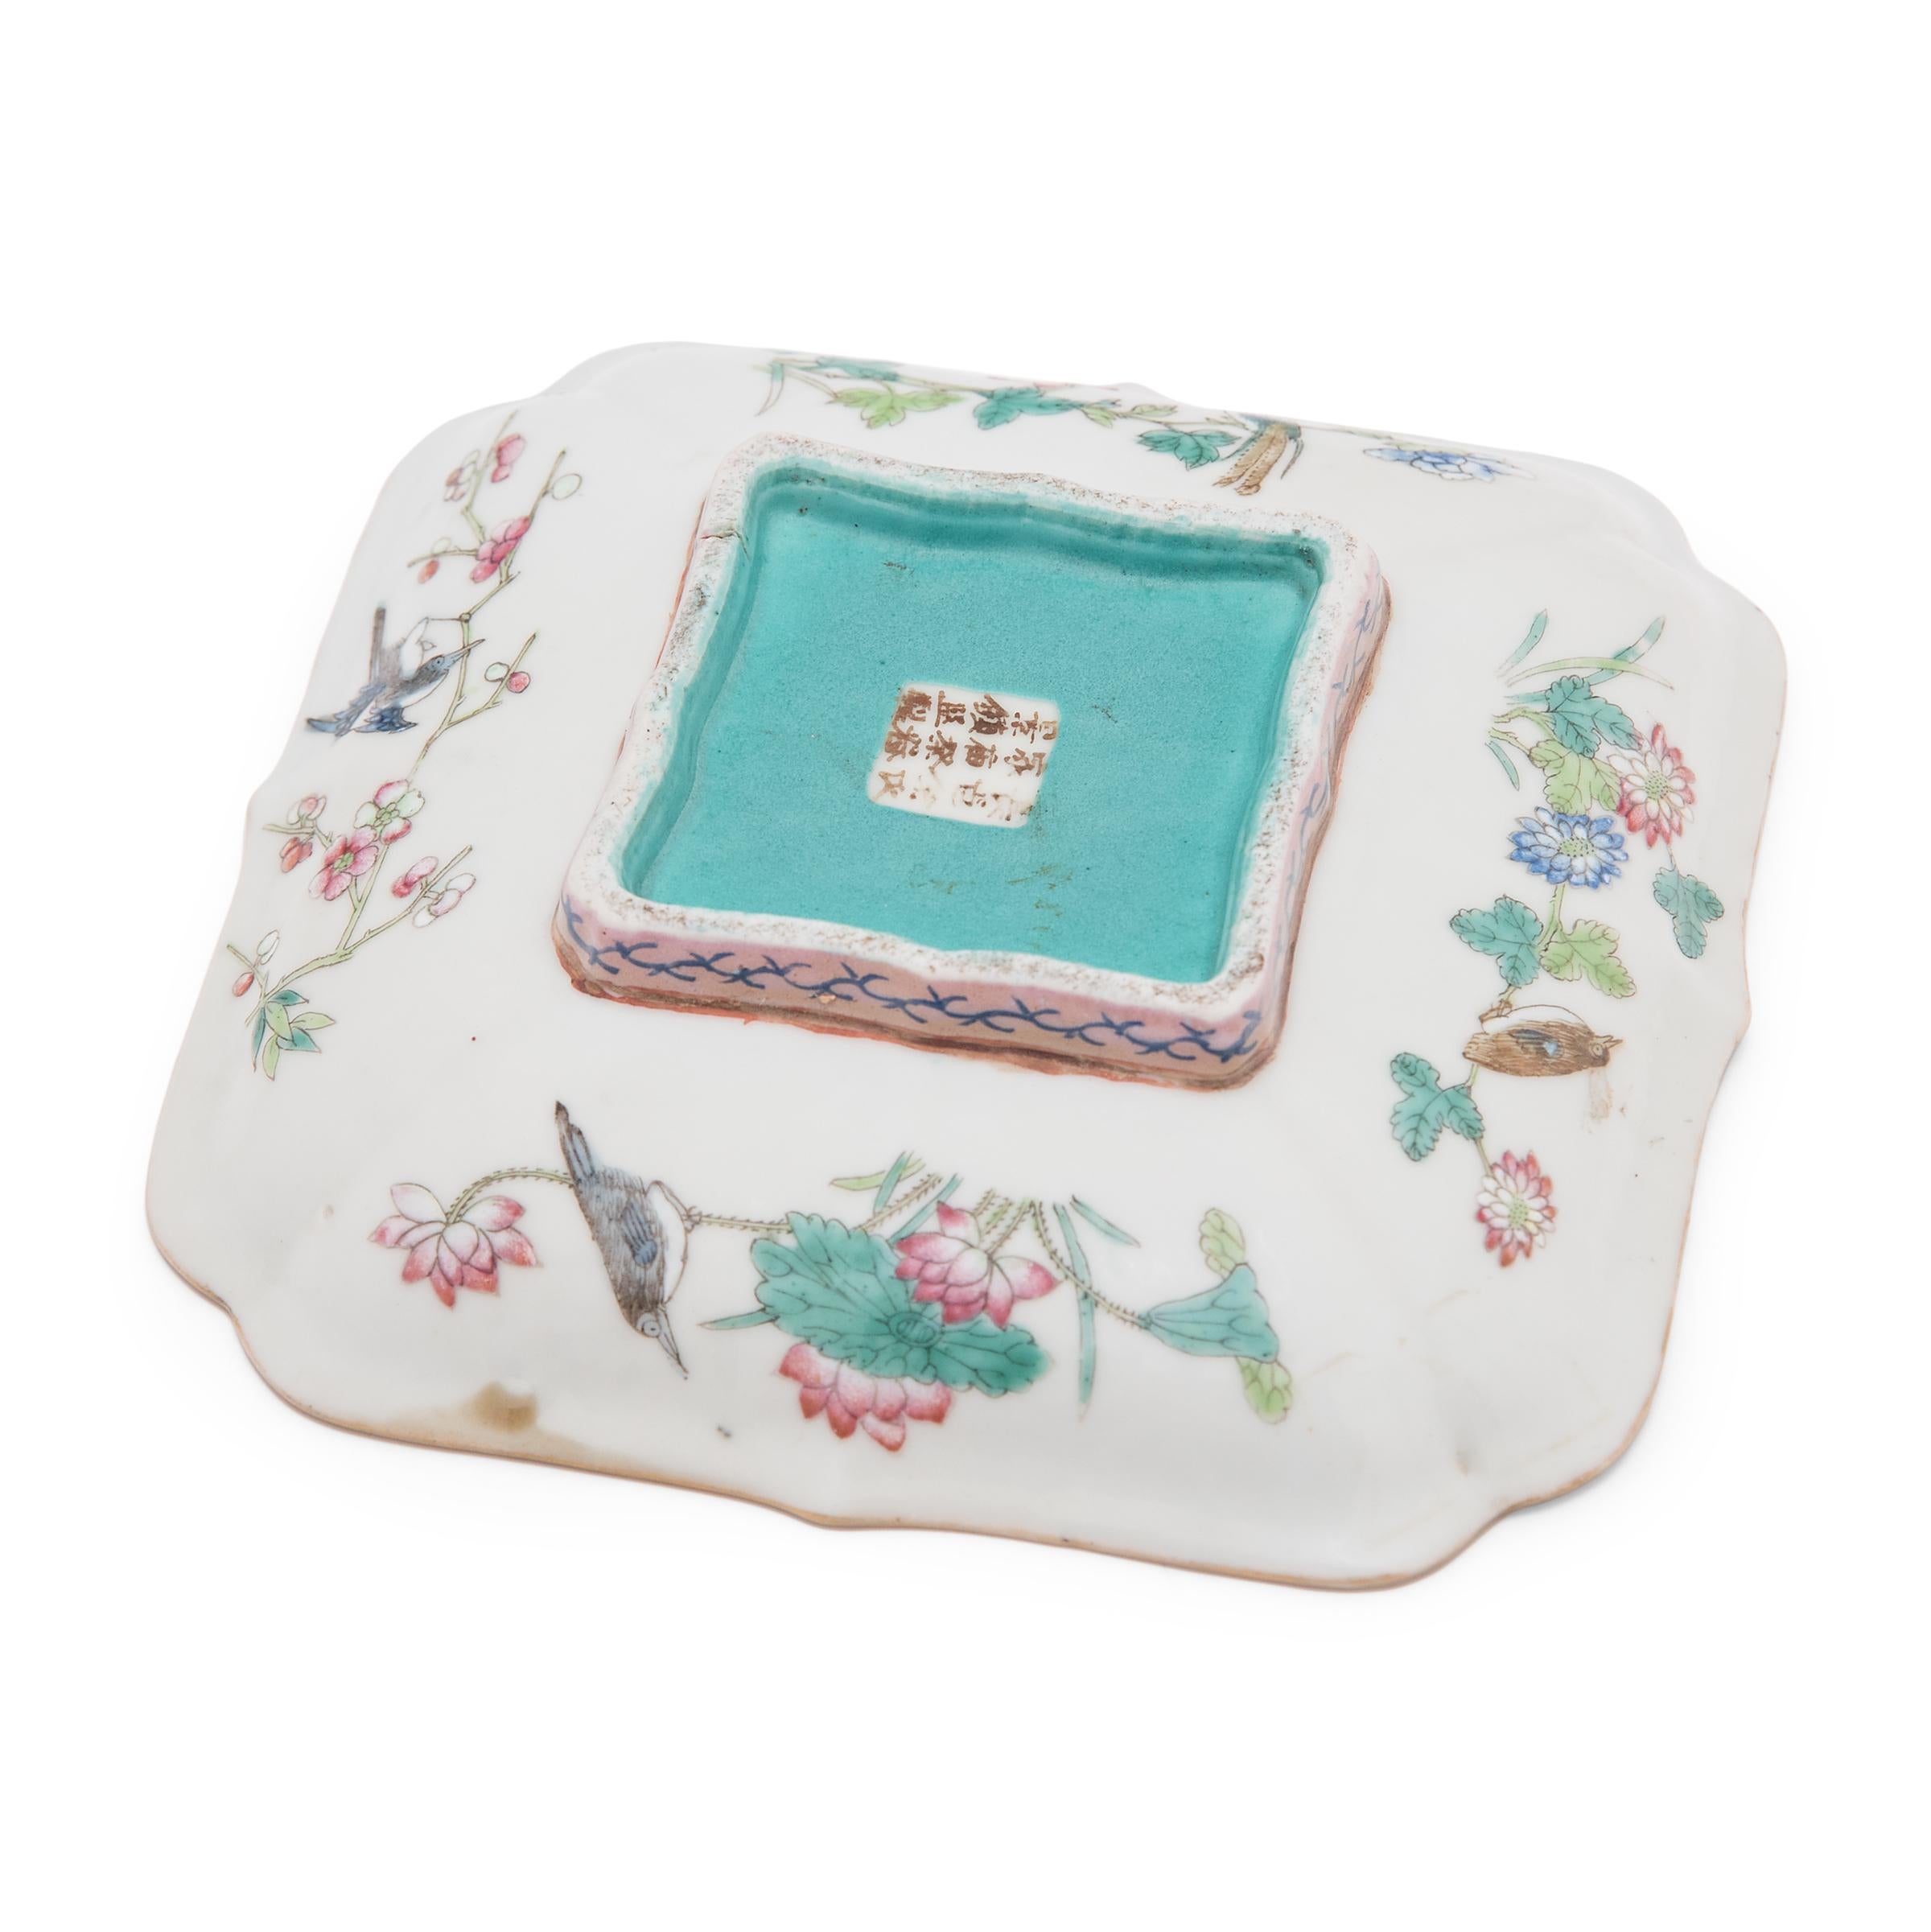 Porcelain Chinese Famille Rose Square Dish, c. 1900